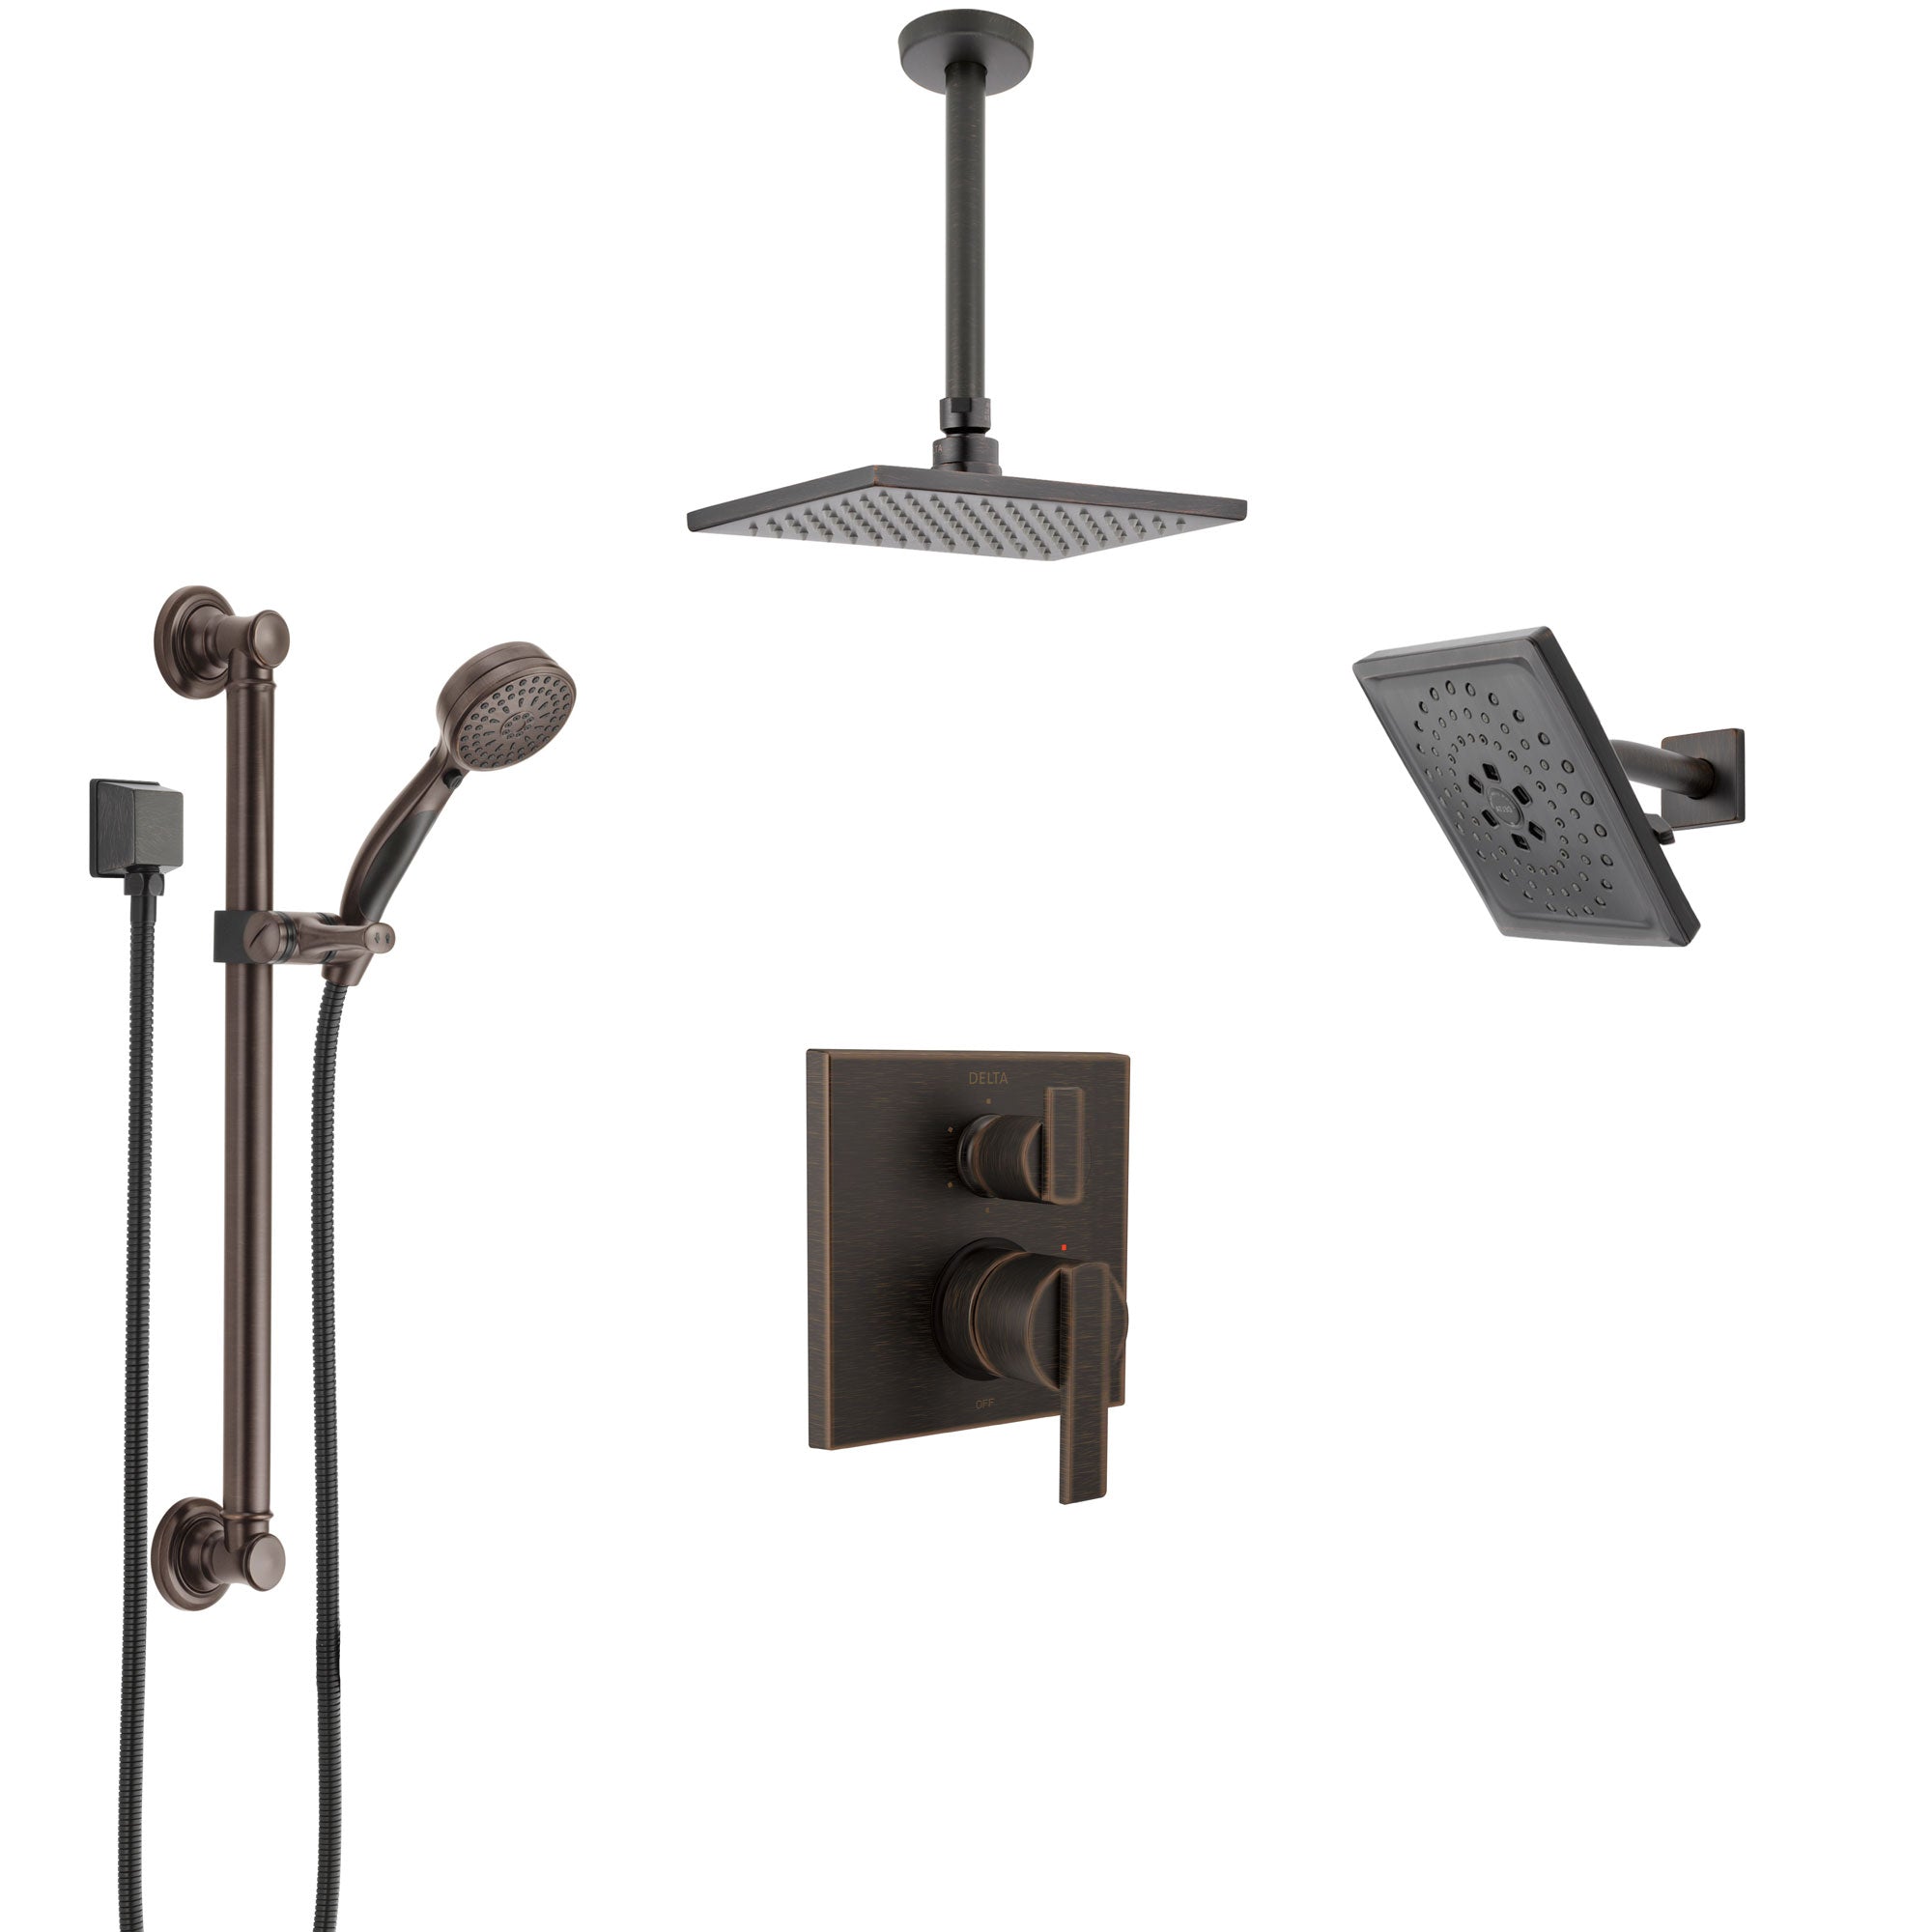 Delta Ara Venetian Bronze Shower System with Control Handle, Integrated Diverter, Showerhead, Ceiling Showerhead, and Grab Bar Hand Shower SS24967RB8